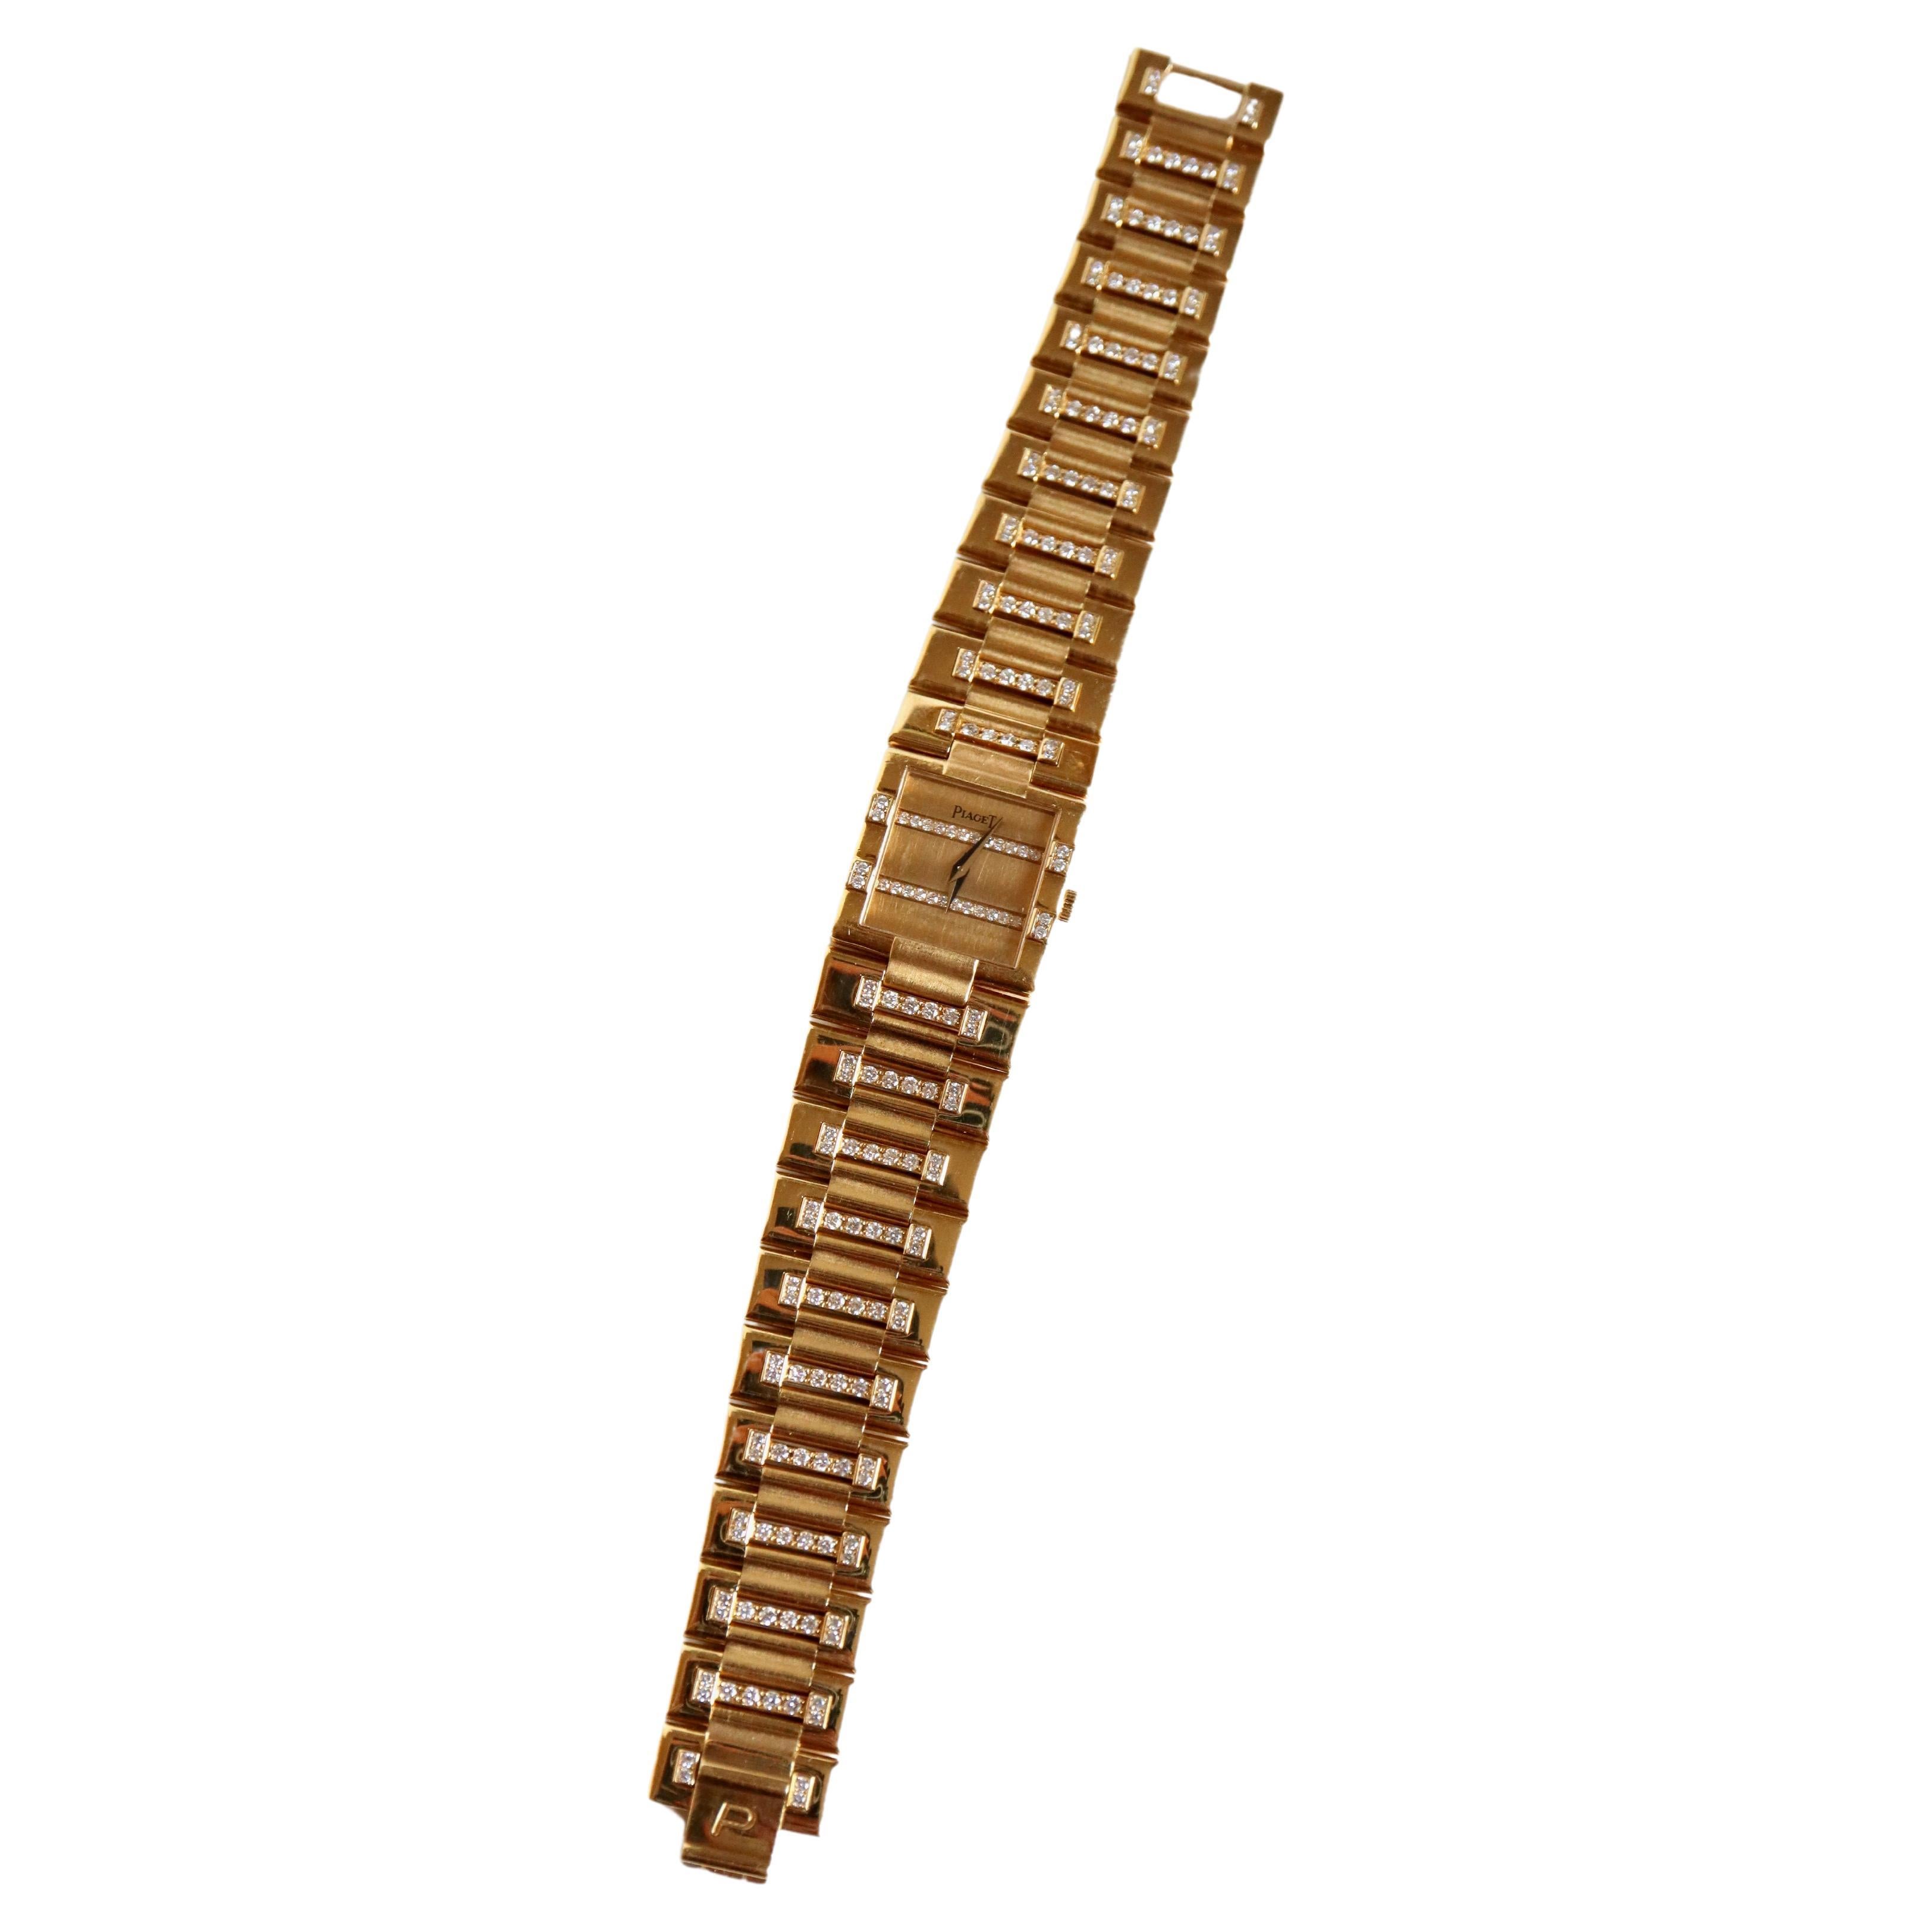 PIAGET ladies' watch in 18K Yellow Gold and Diamonds
PIAGET watch in 18-carat yellow gold paved with Diamonds, each link is paved with bars holding 8 Brilliant Cut diamonds and the dial paved with two bars of 16 Brilliant Cut diamonds for a total